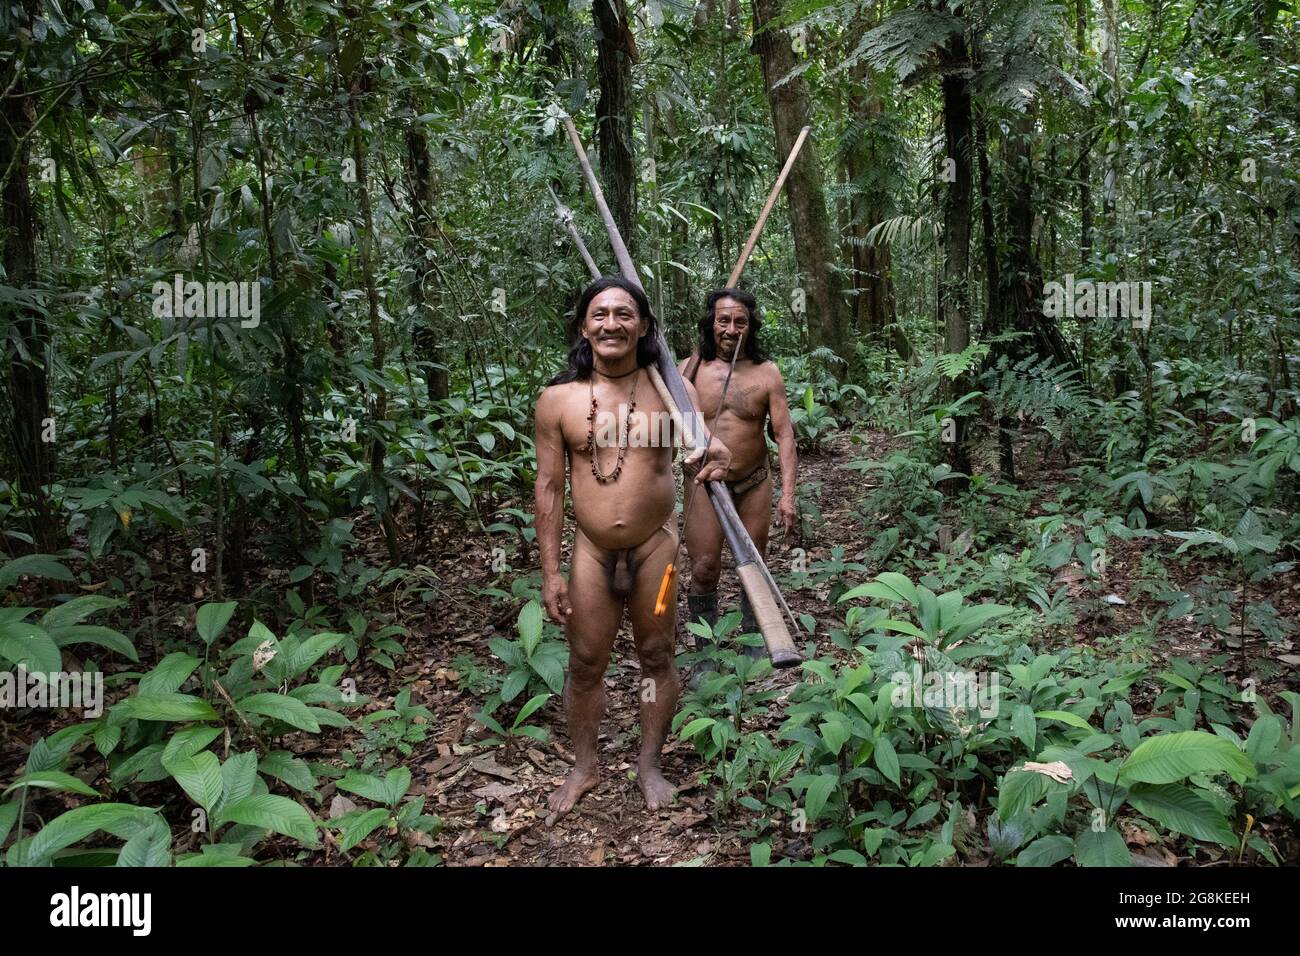 A hunting expedition made its way into the jungle. AMAZONIAN ECUADOR: In one image, a woman wore red makeup across her eyes and a feathered headdress Stock Photo